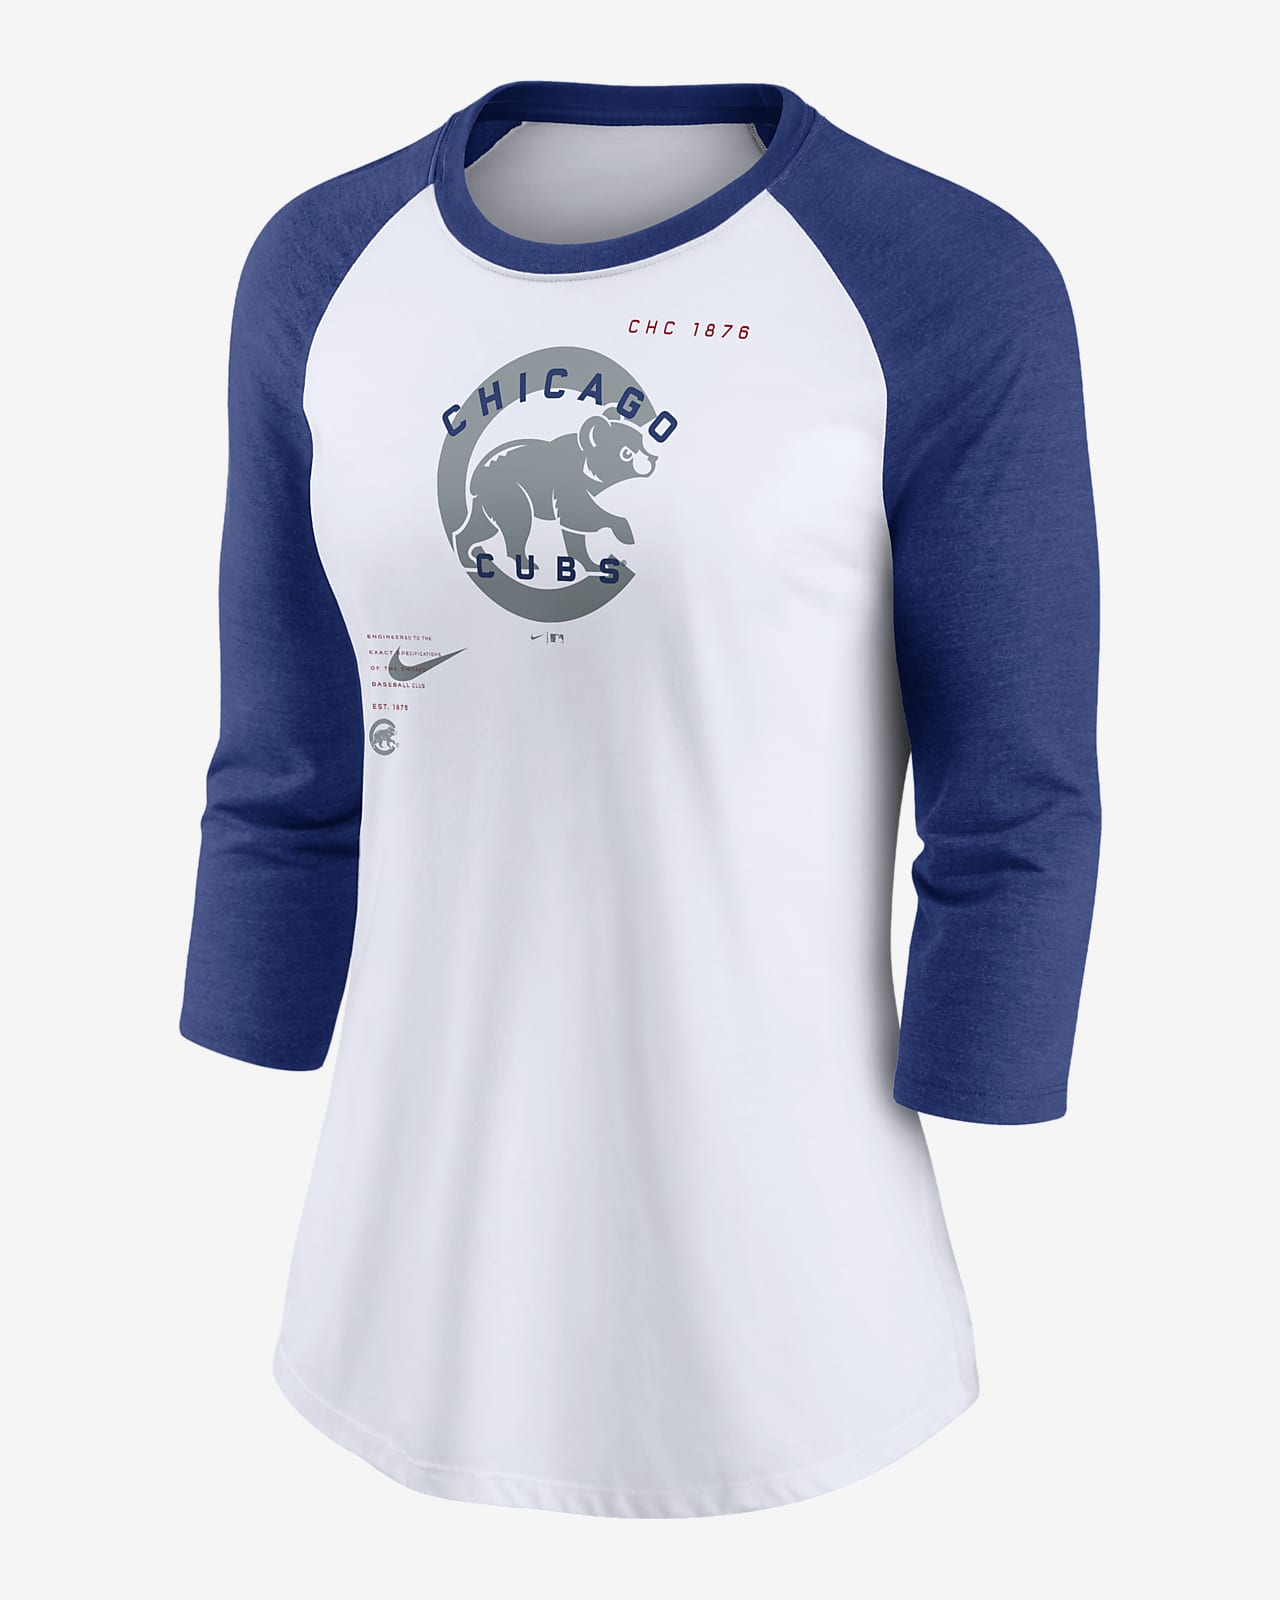 Nike Next Up (MLB Chicago Cubs) Women's 3/4-Sleeve Top